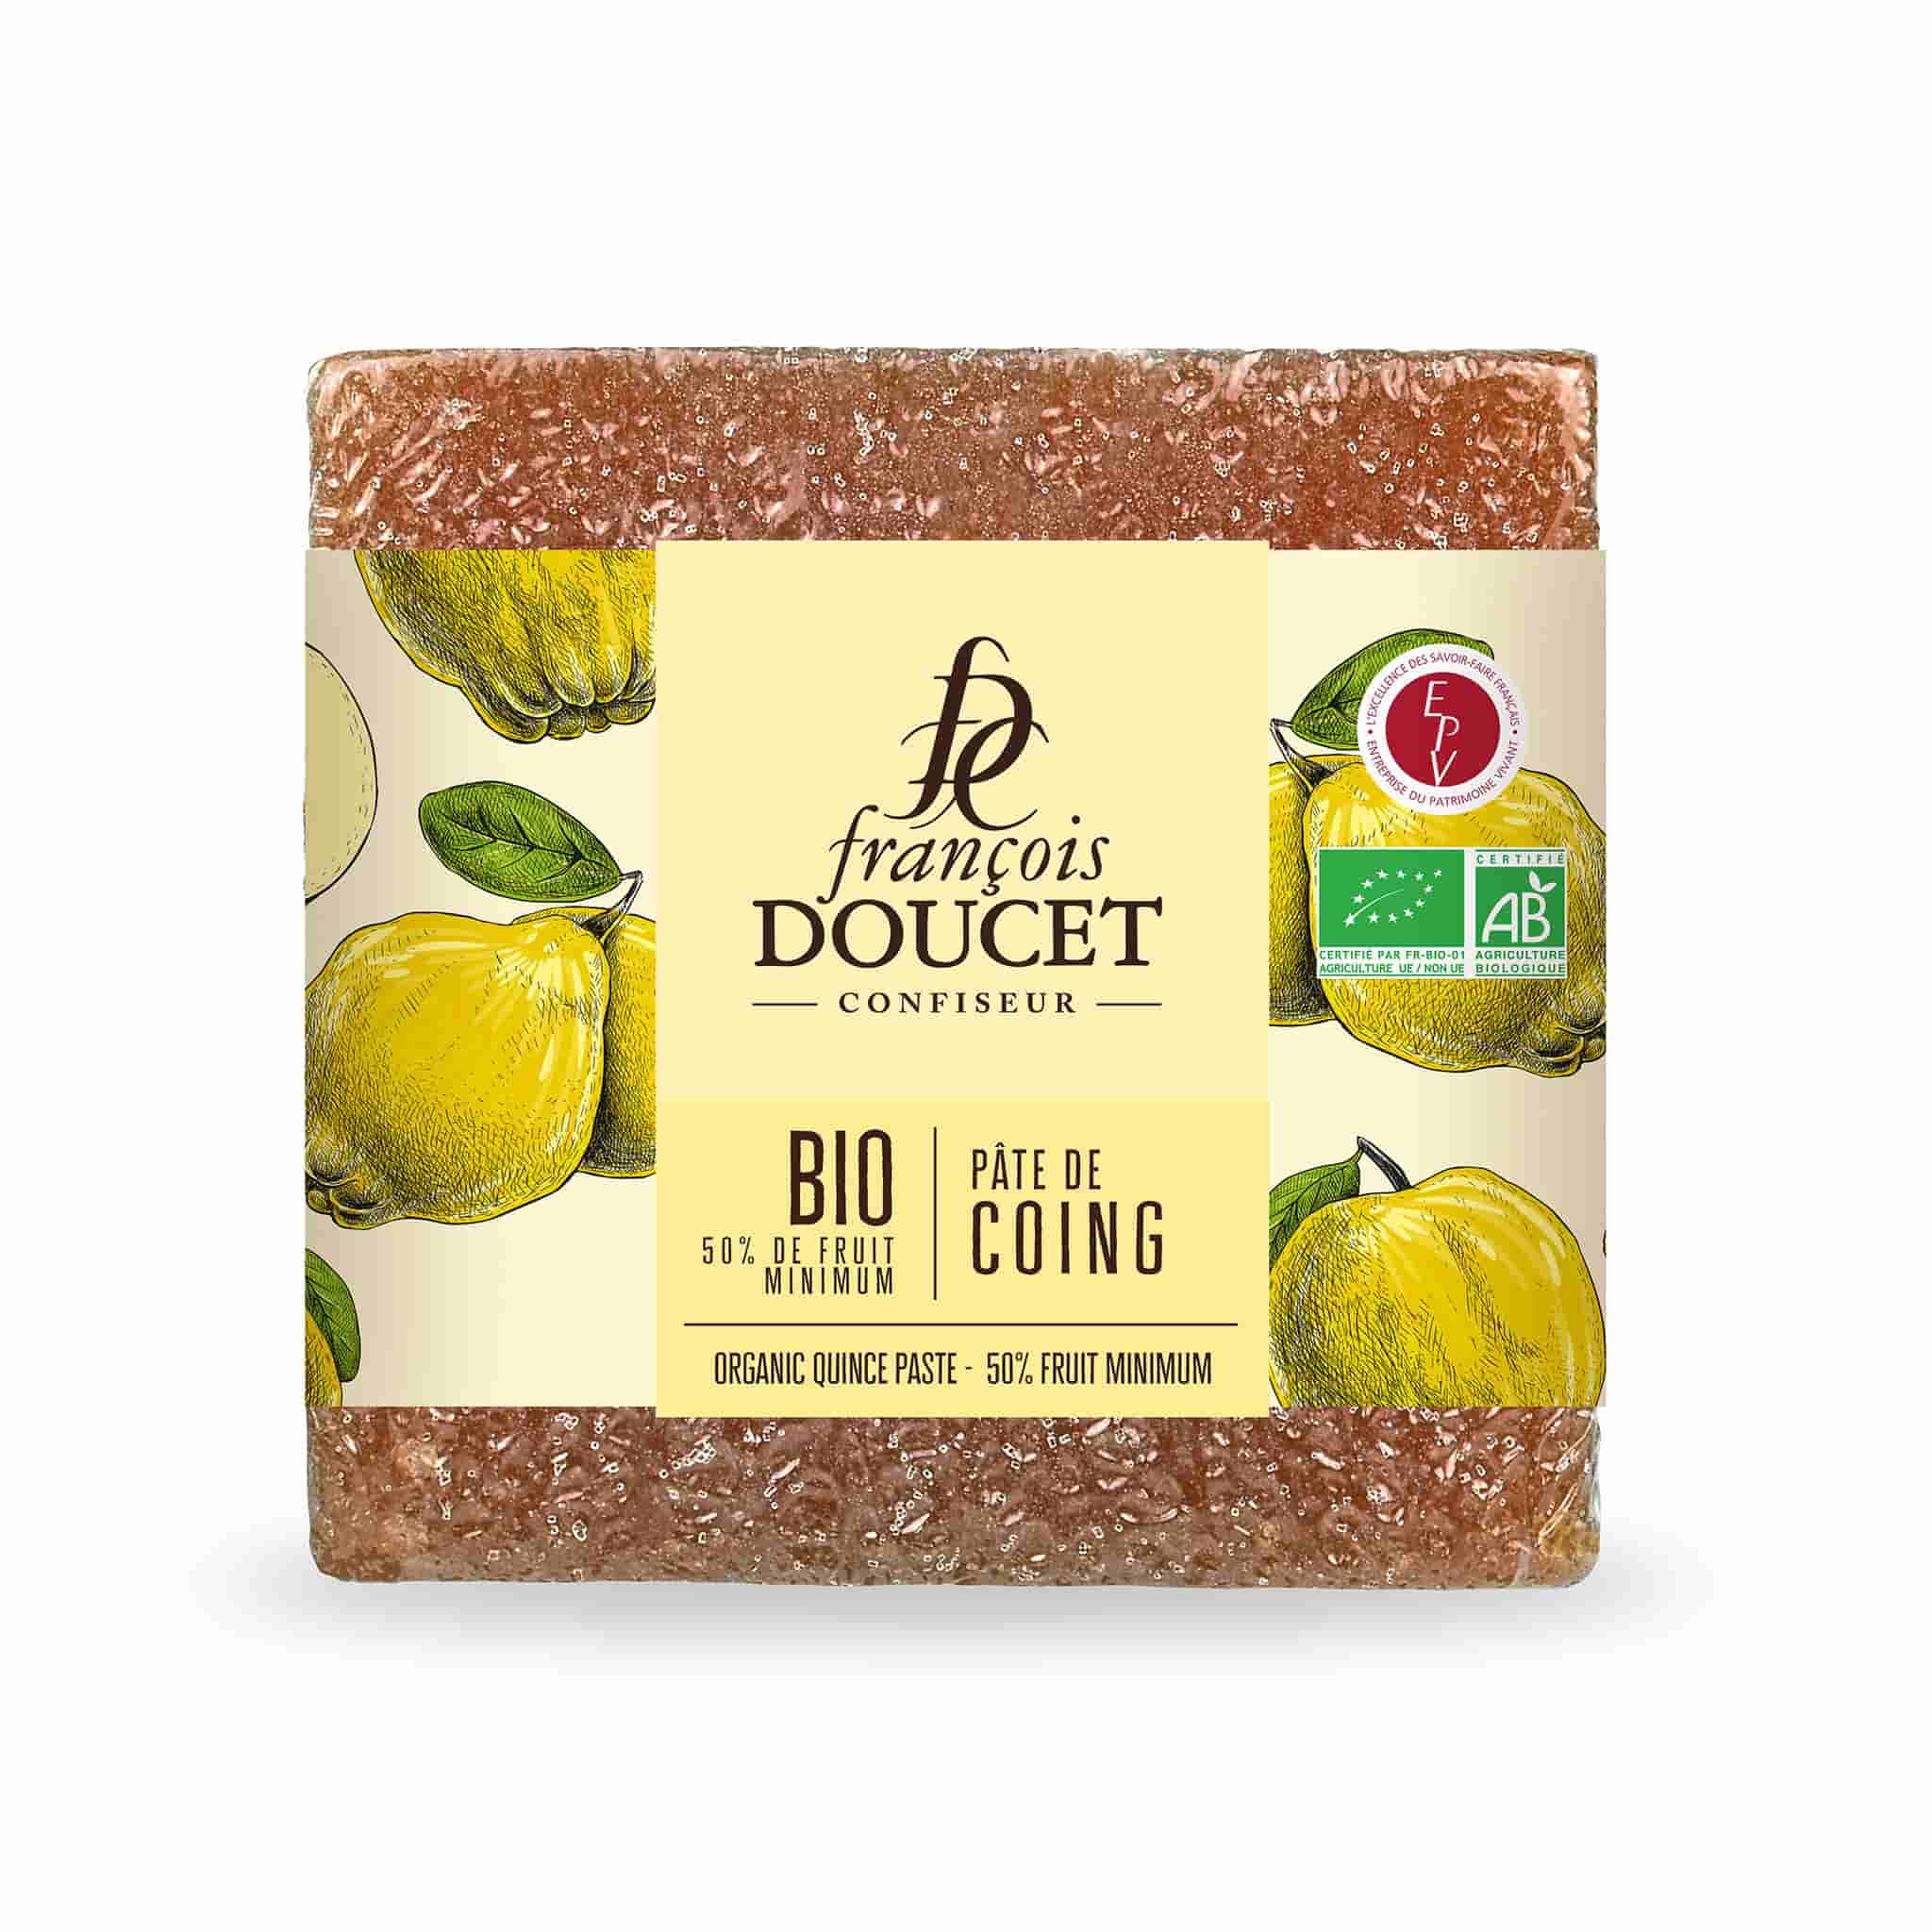 Francois Doucet Organic Quince Paste 170g front of pack